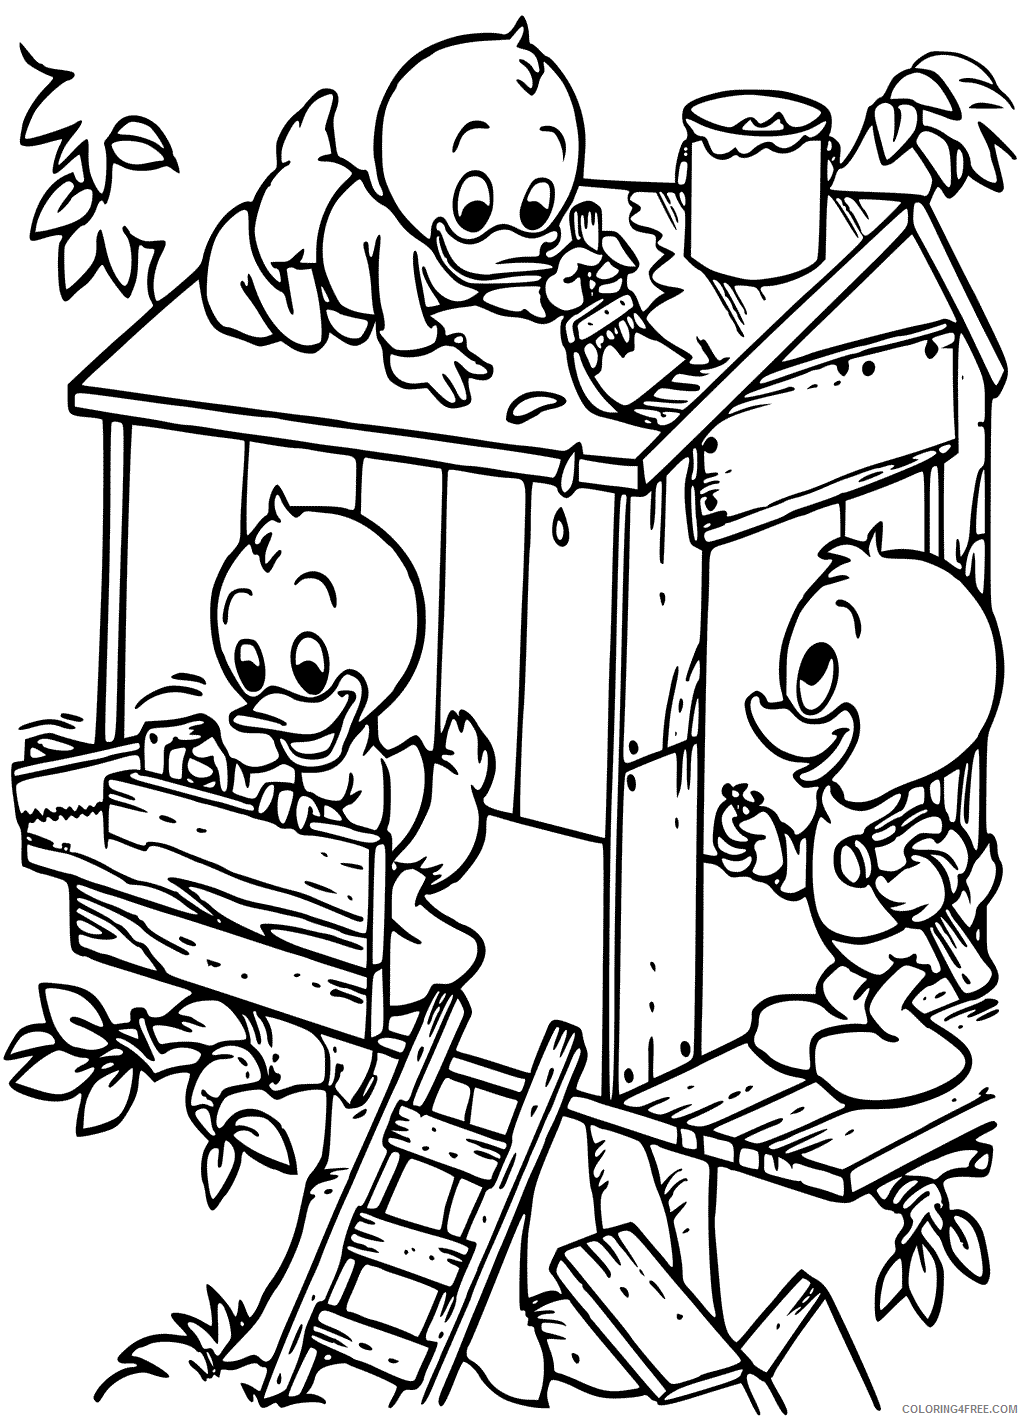 Duck Coloring Pages Animal Printable Sheets Ducks building Treehouse 2021 1825 Coloring4free